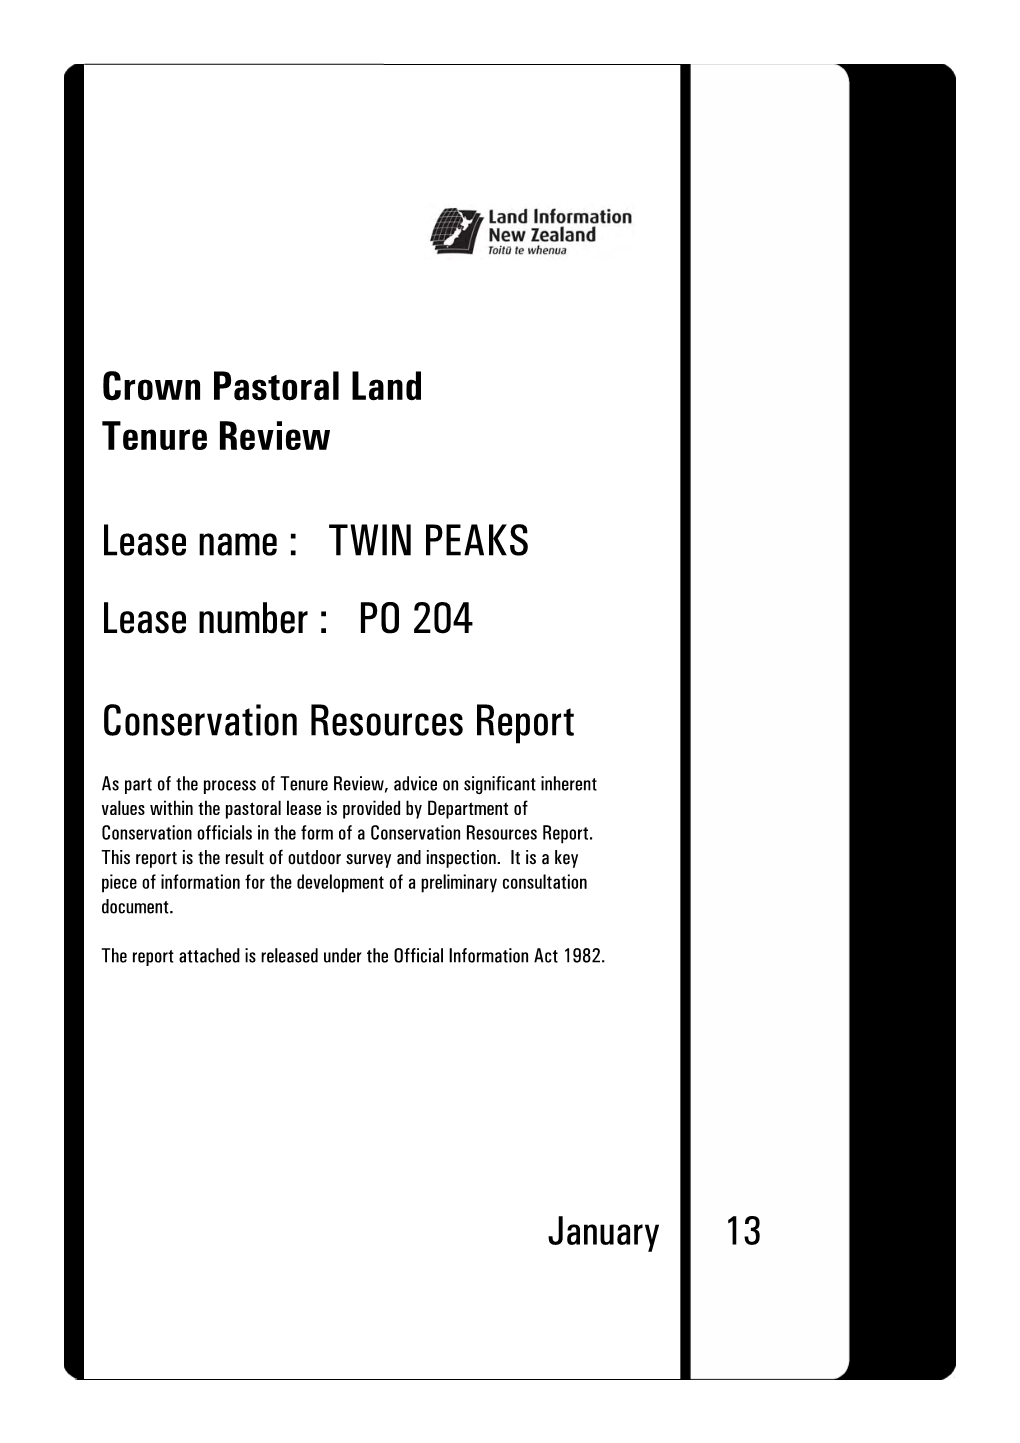 TWIN PEAKS Conservation Resources Report